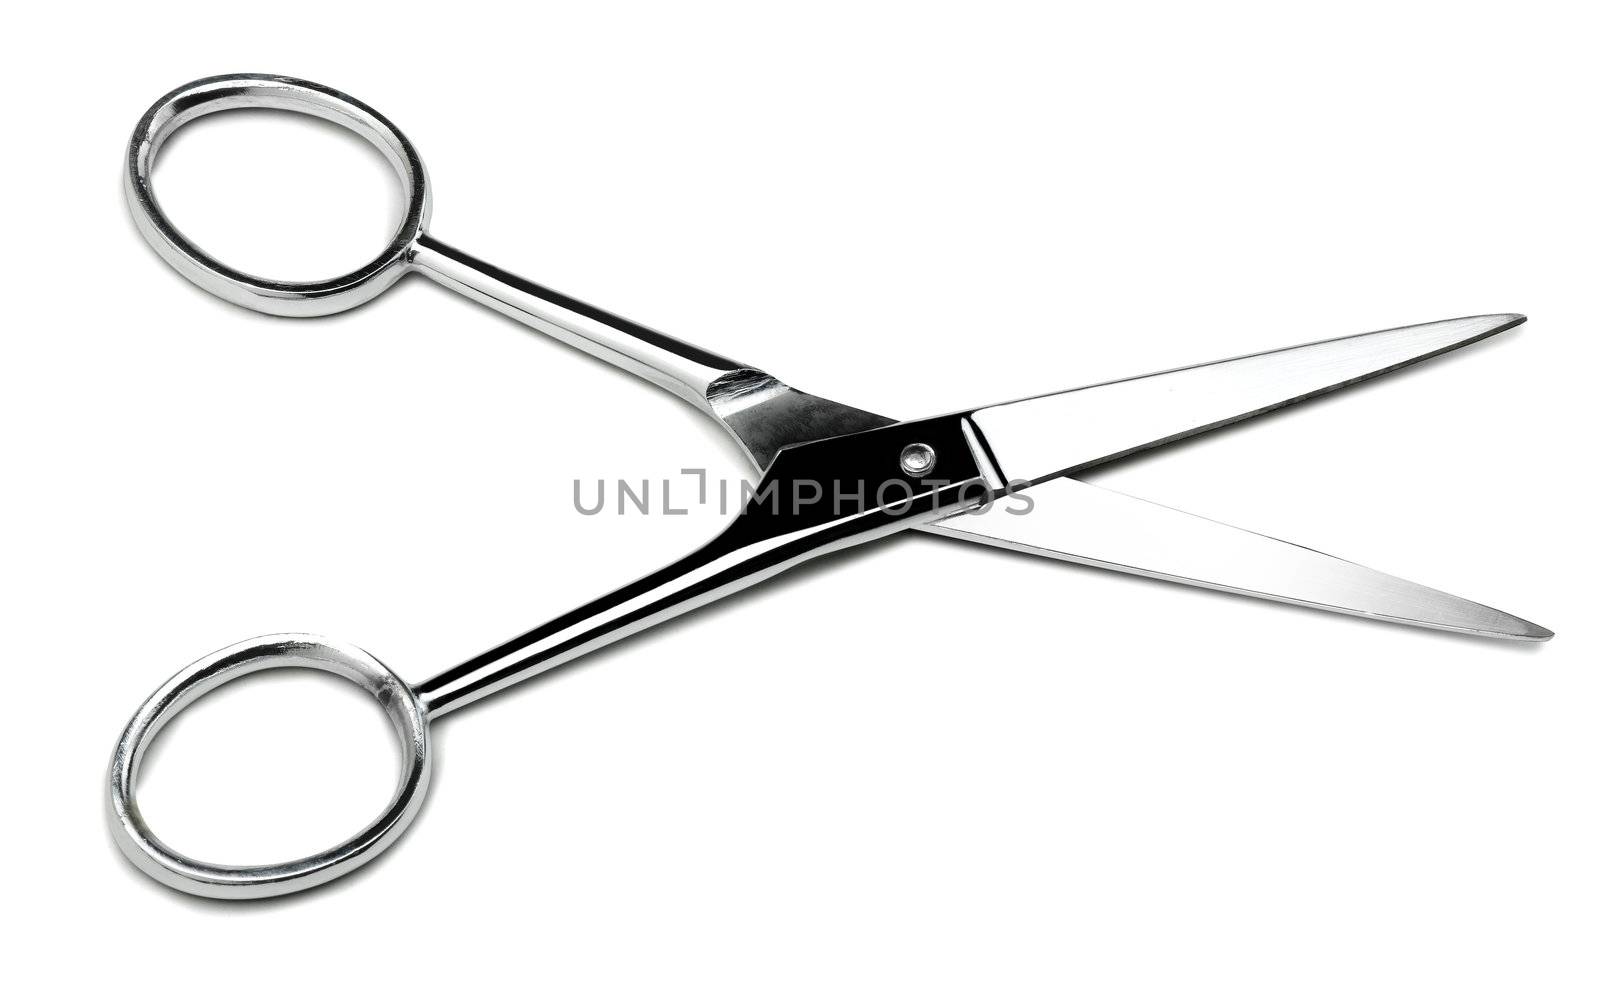 Scissors hairdresser with clipping path on white